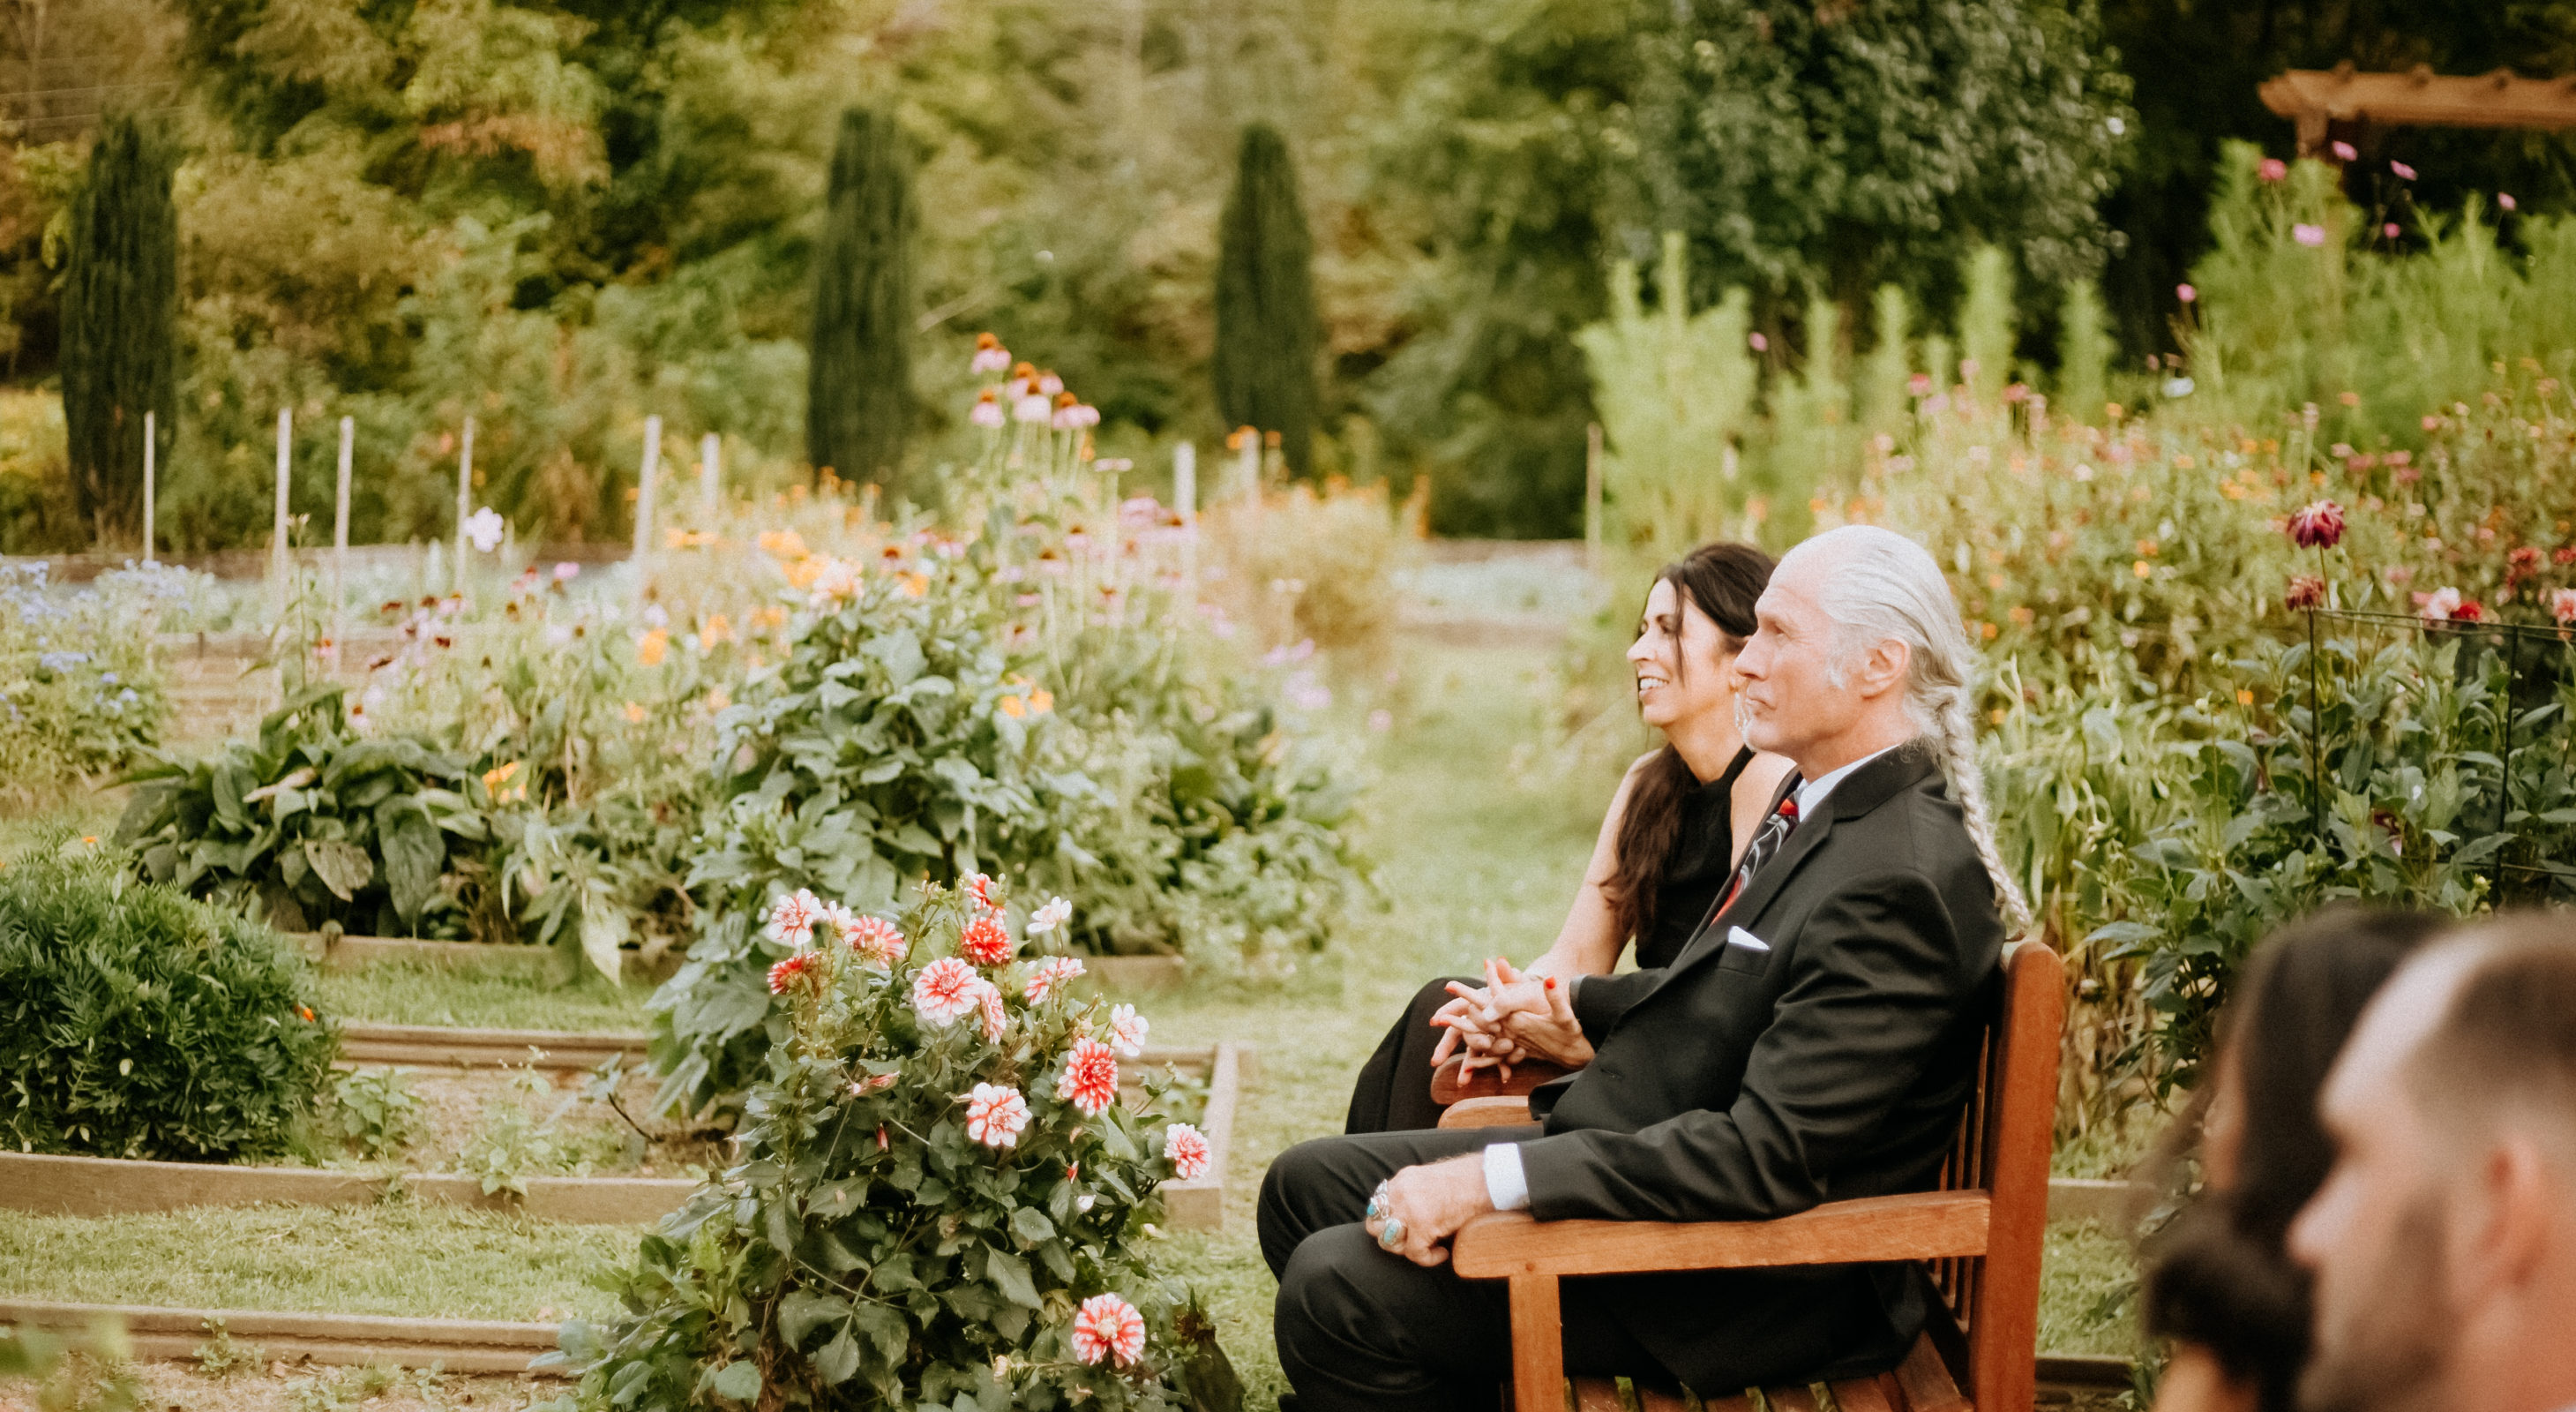 Couple in a open field with a bench